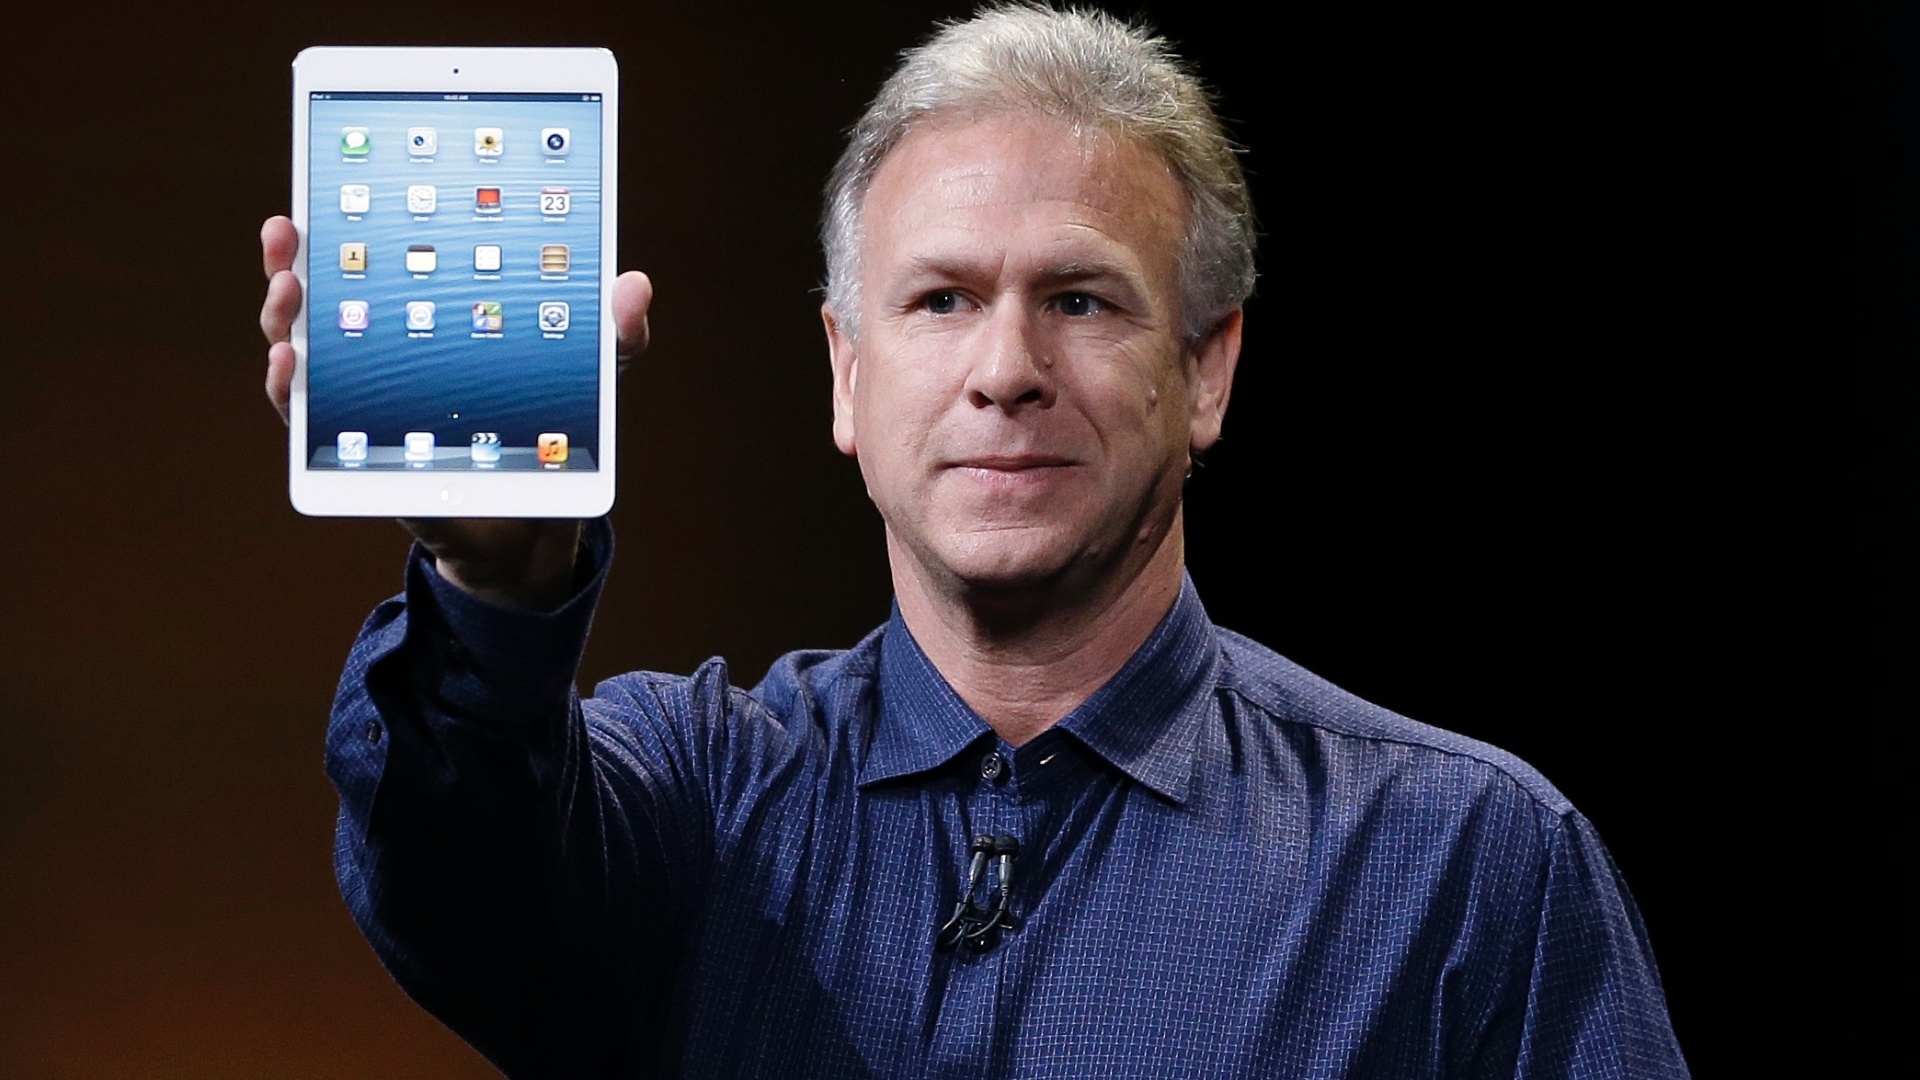 Phil Schiller Talks About iPad Creation in New York Times Retrospective